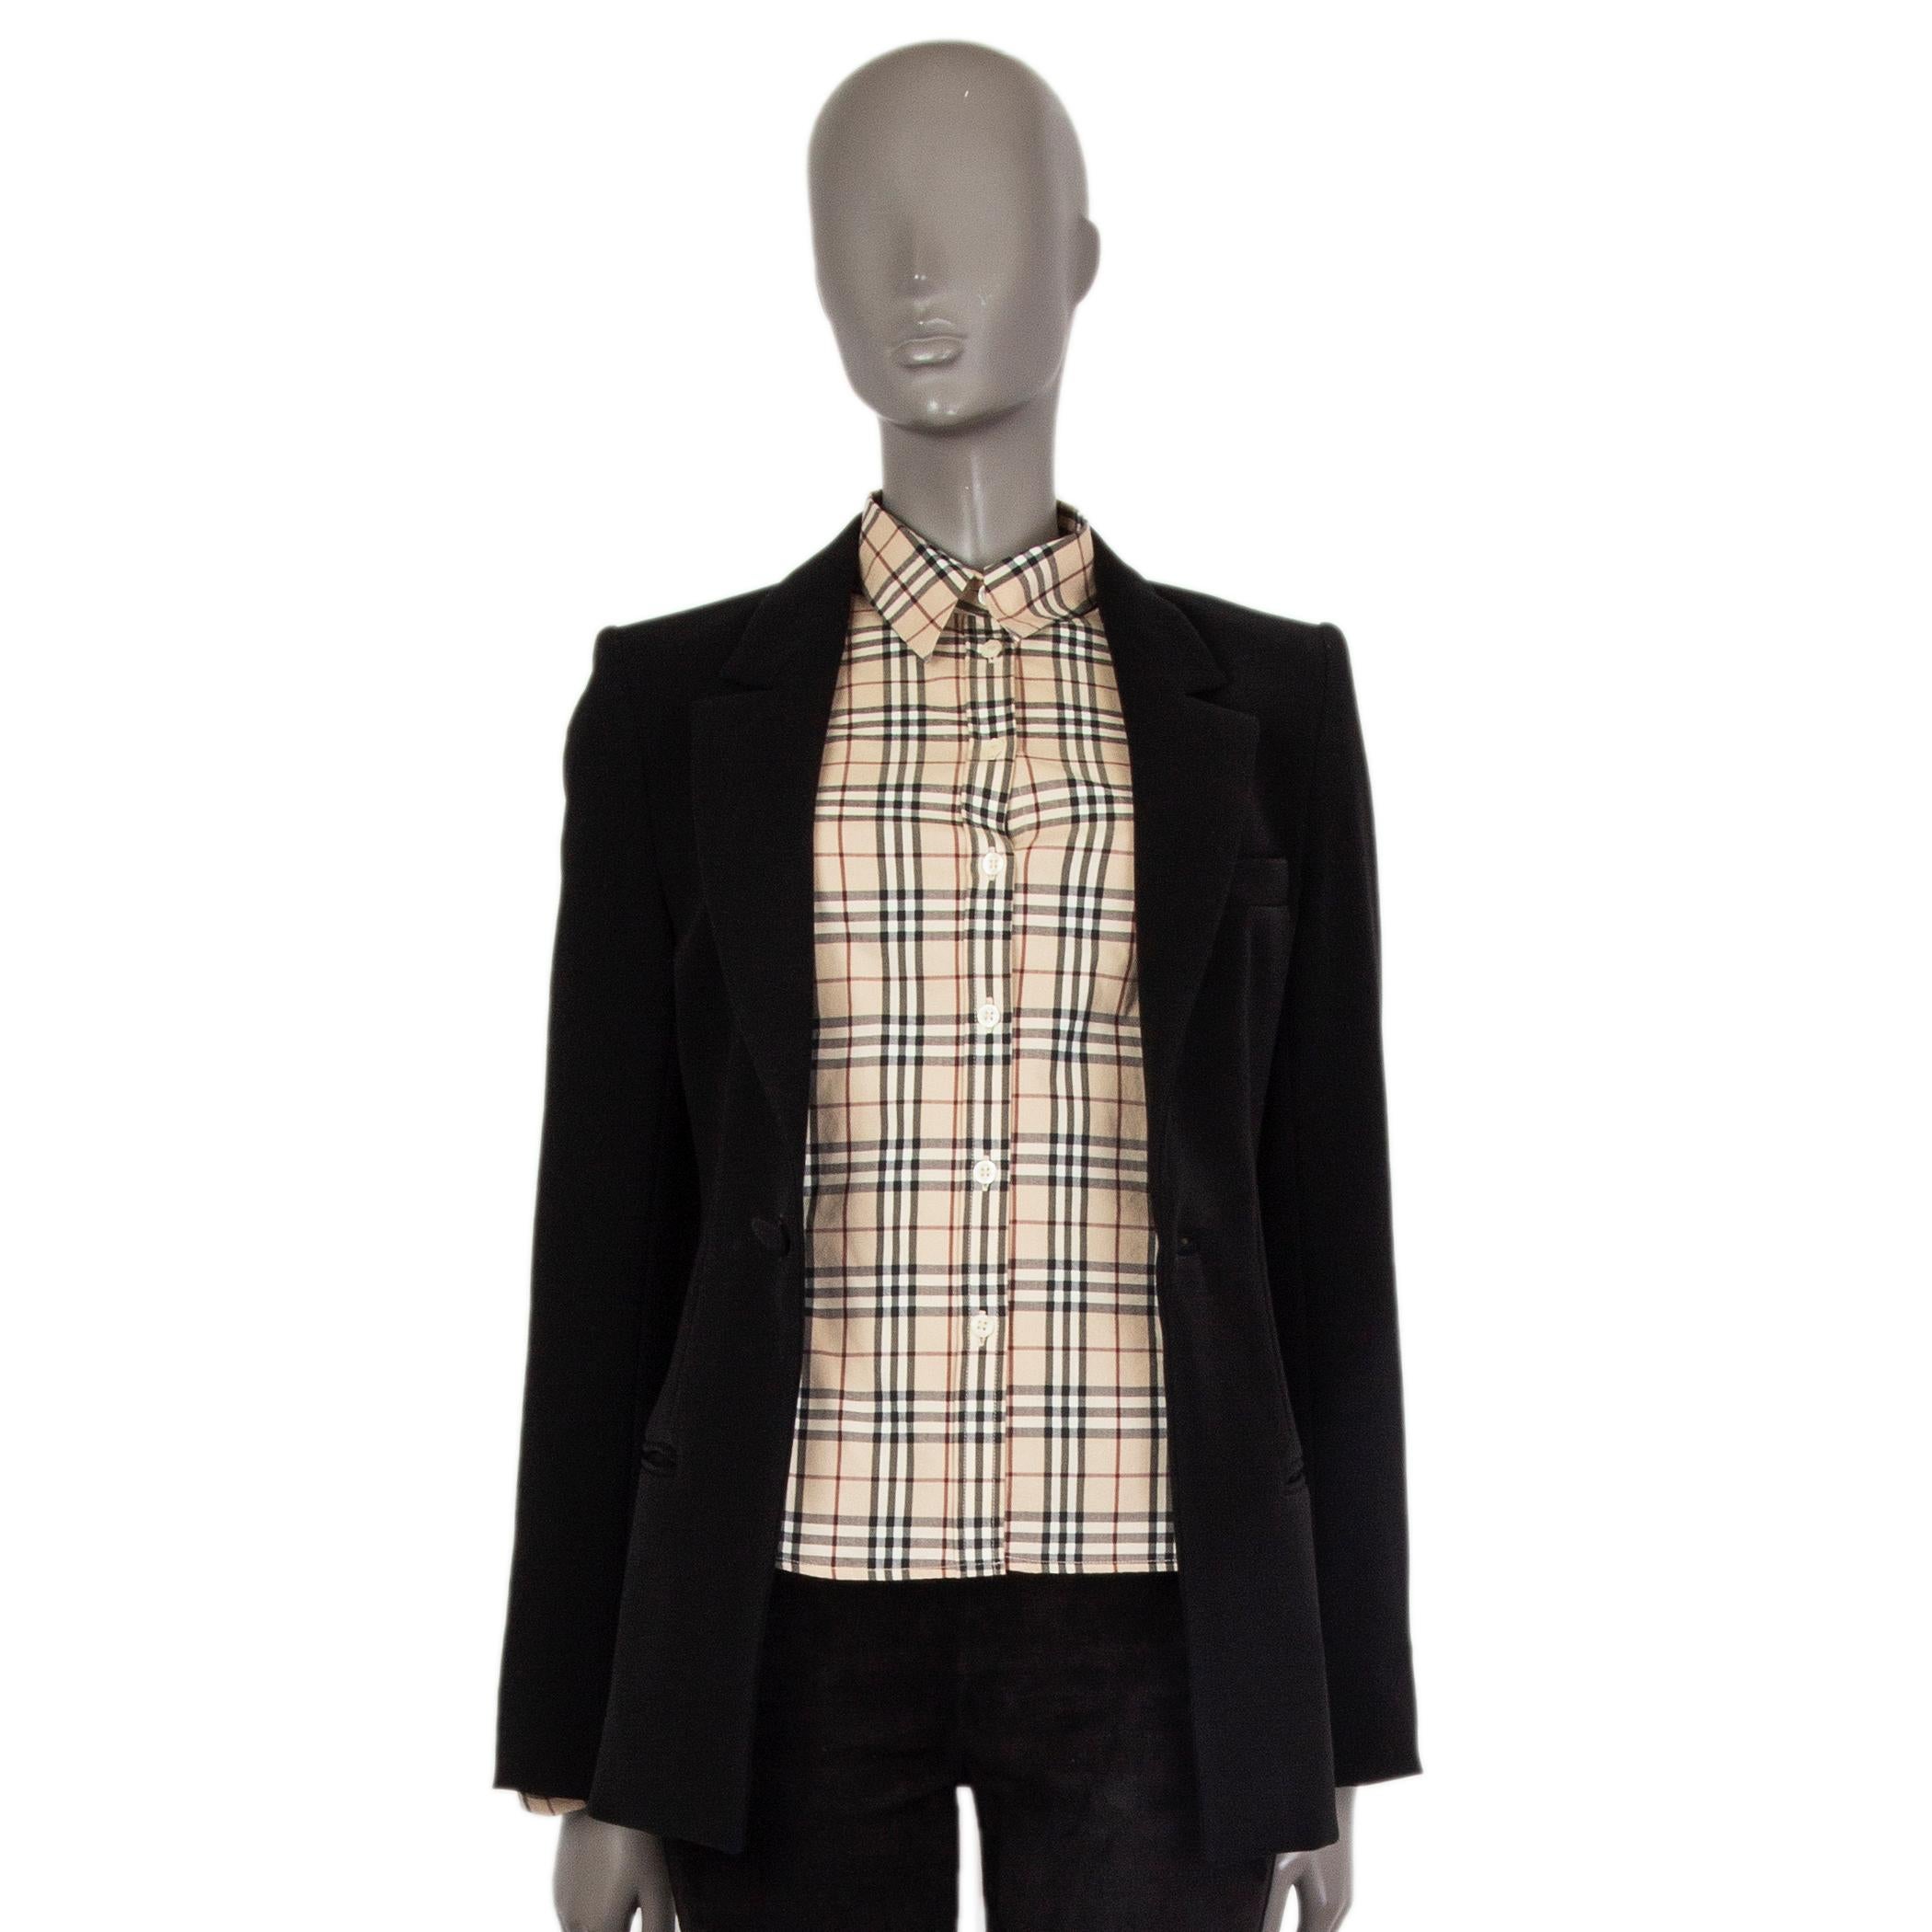 100% authentic Balenciaga open blazer in black polyester (100%). With notch collar, chest pocket, two welt pockets on the sides, slit cuffs, and slit on the back. Features decorative misplaced button and eyelet on the front, meant to be worn open.